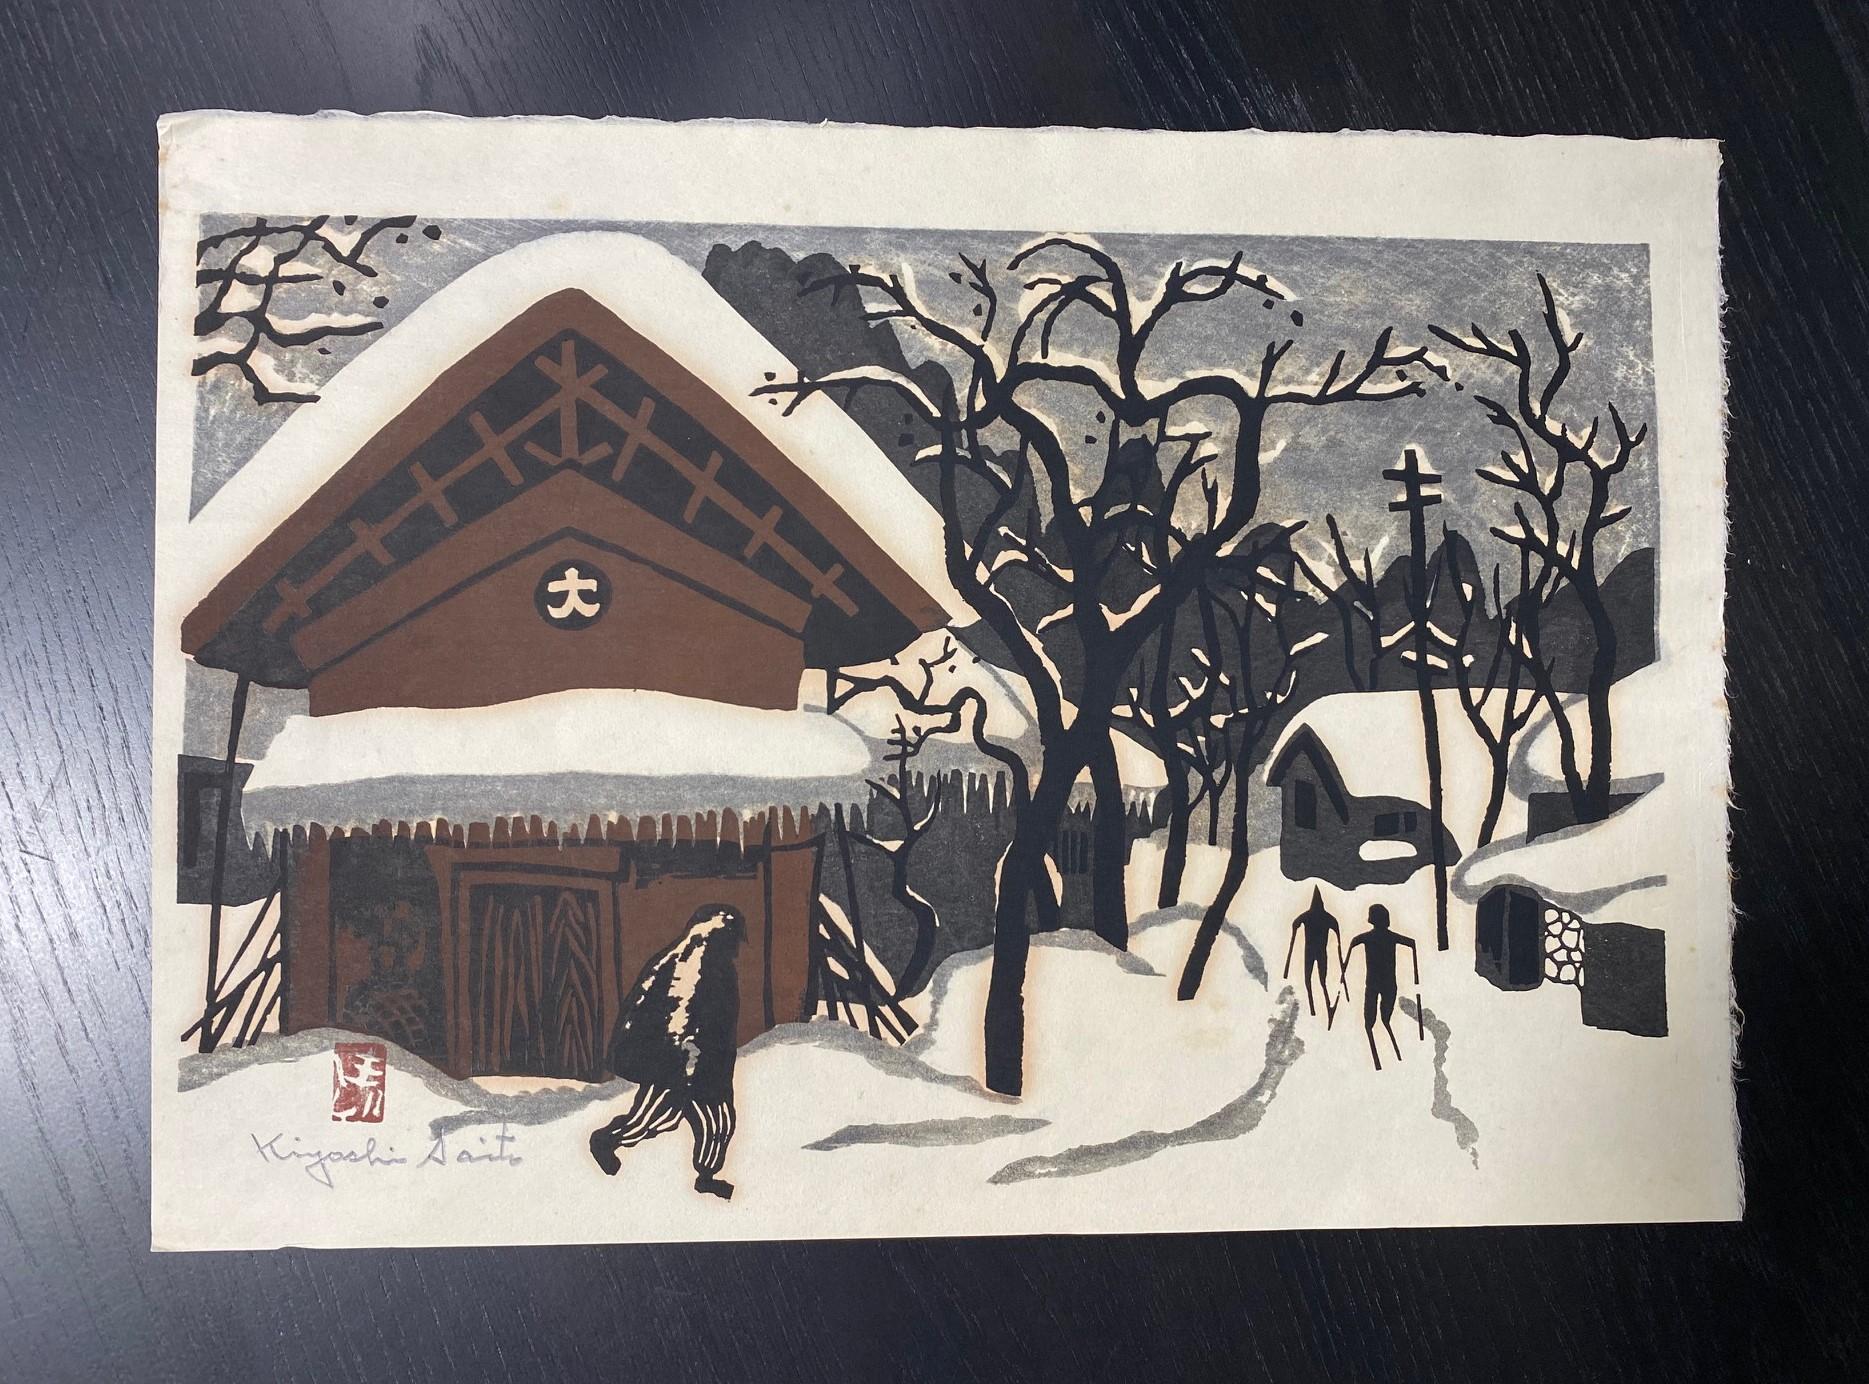 This beautifully composed woodblock print featuring two skiers on a snowy pathway as a solidary figure passes in the foreground is by famed Japanese printmaker Kiyoshi Saito. Many consider Saito to be one of the most important, if not the most